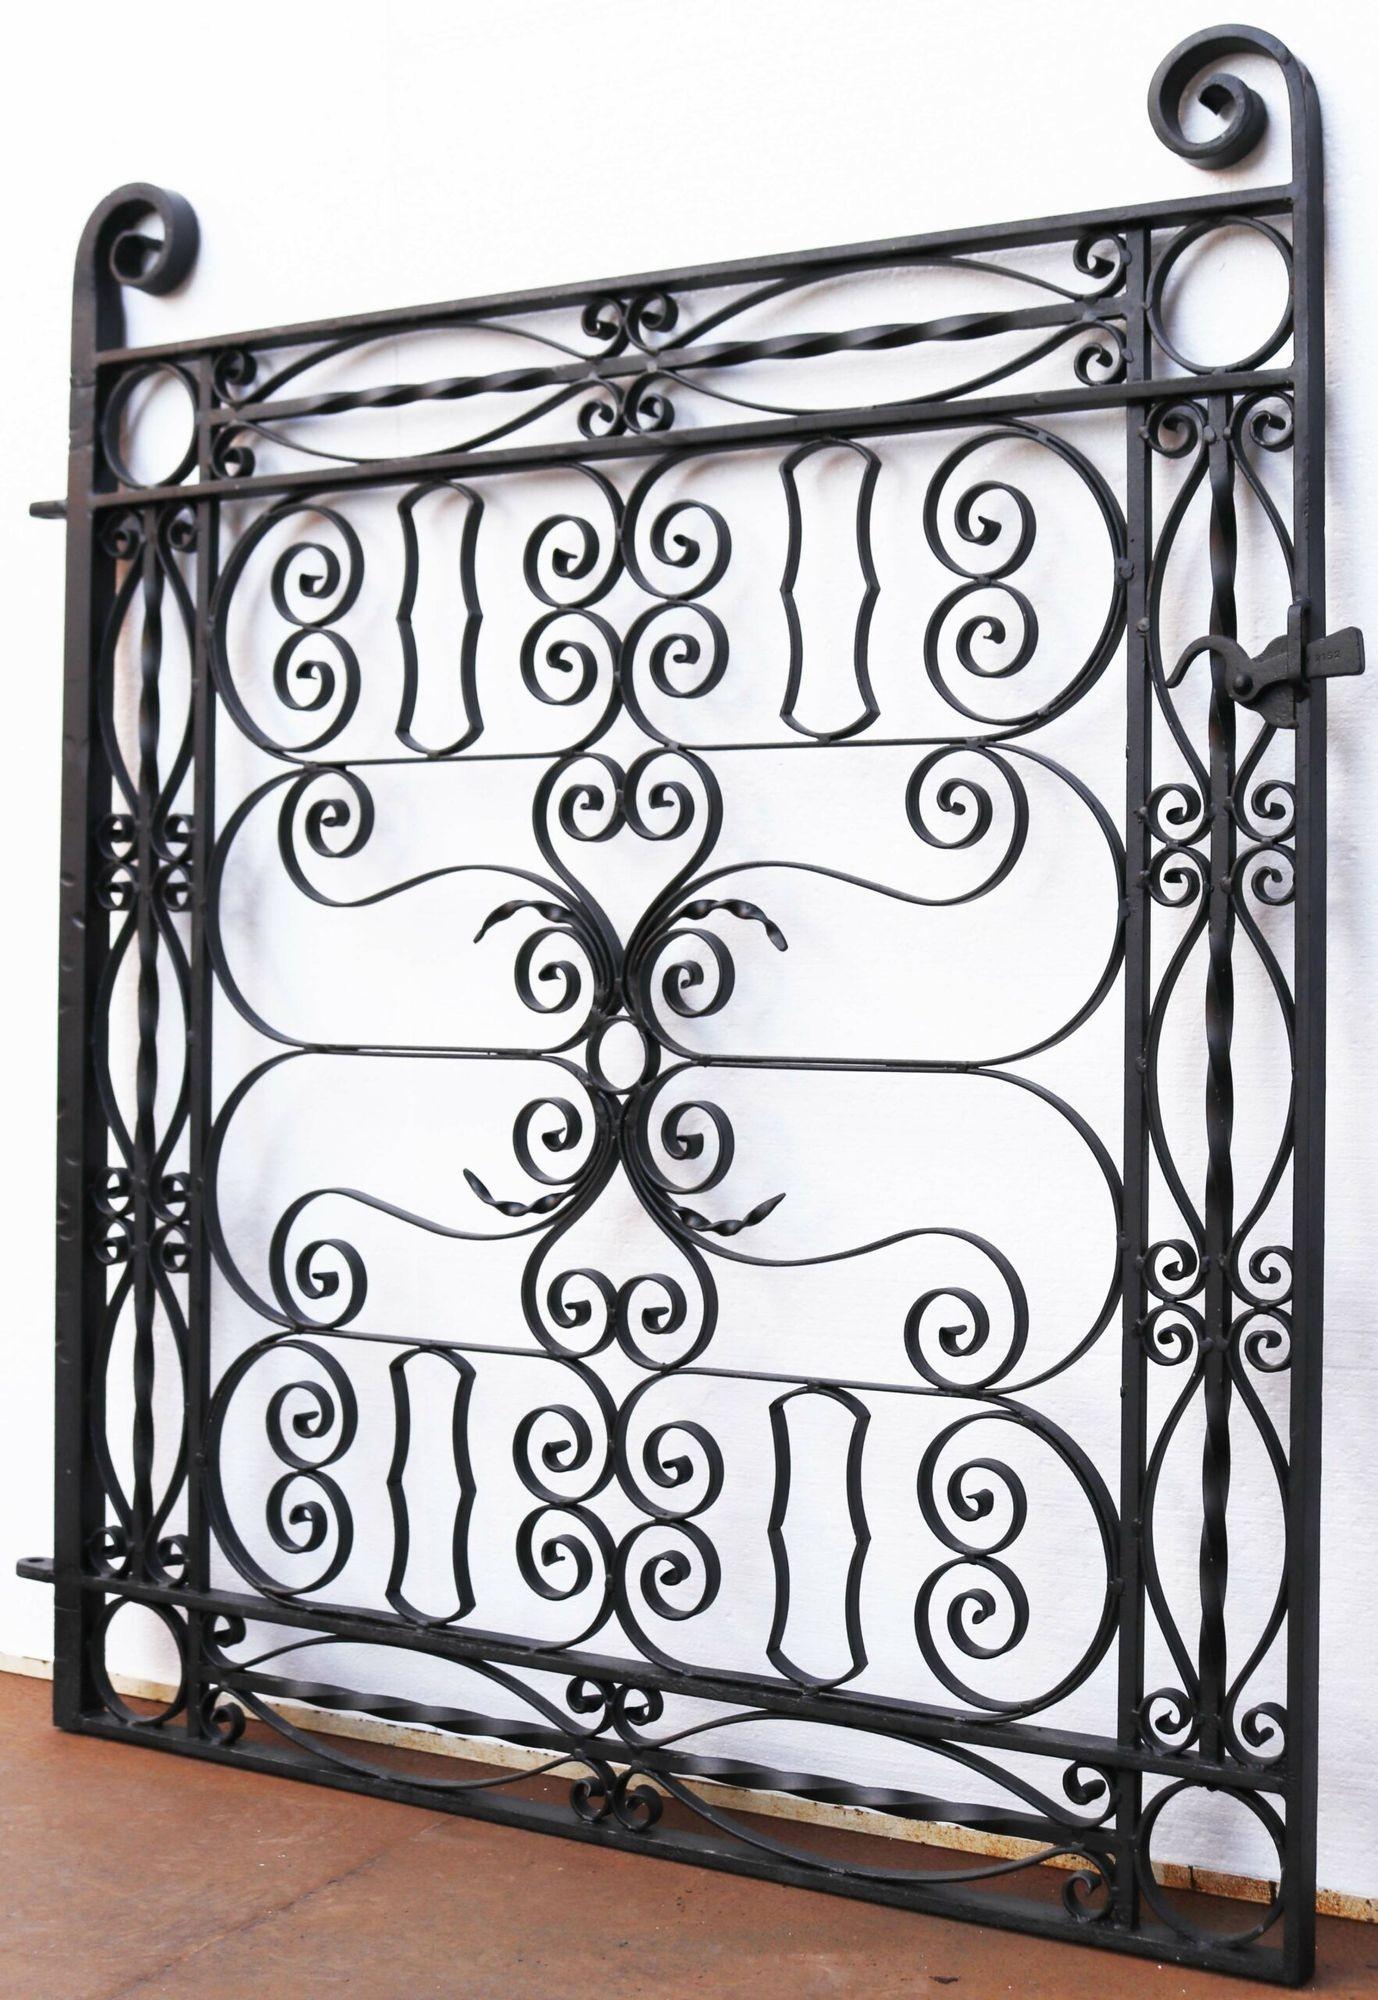 A beautifully designed, large garden gate with scrolling bracket features.
 
Additional dimensions:
For an opening of approximately 139 cm.